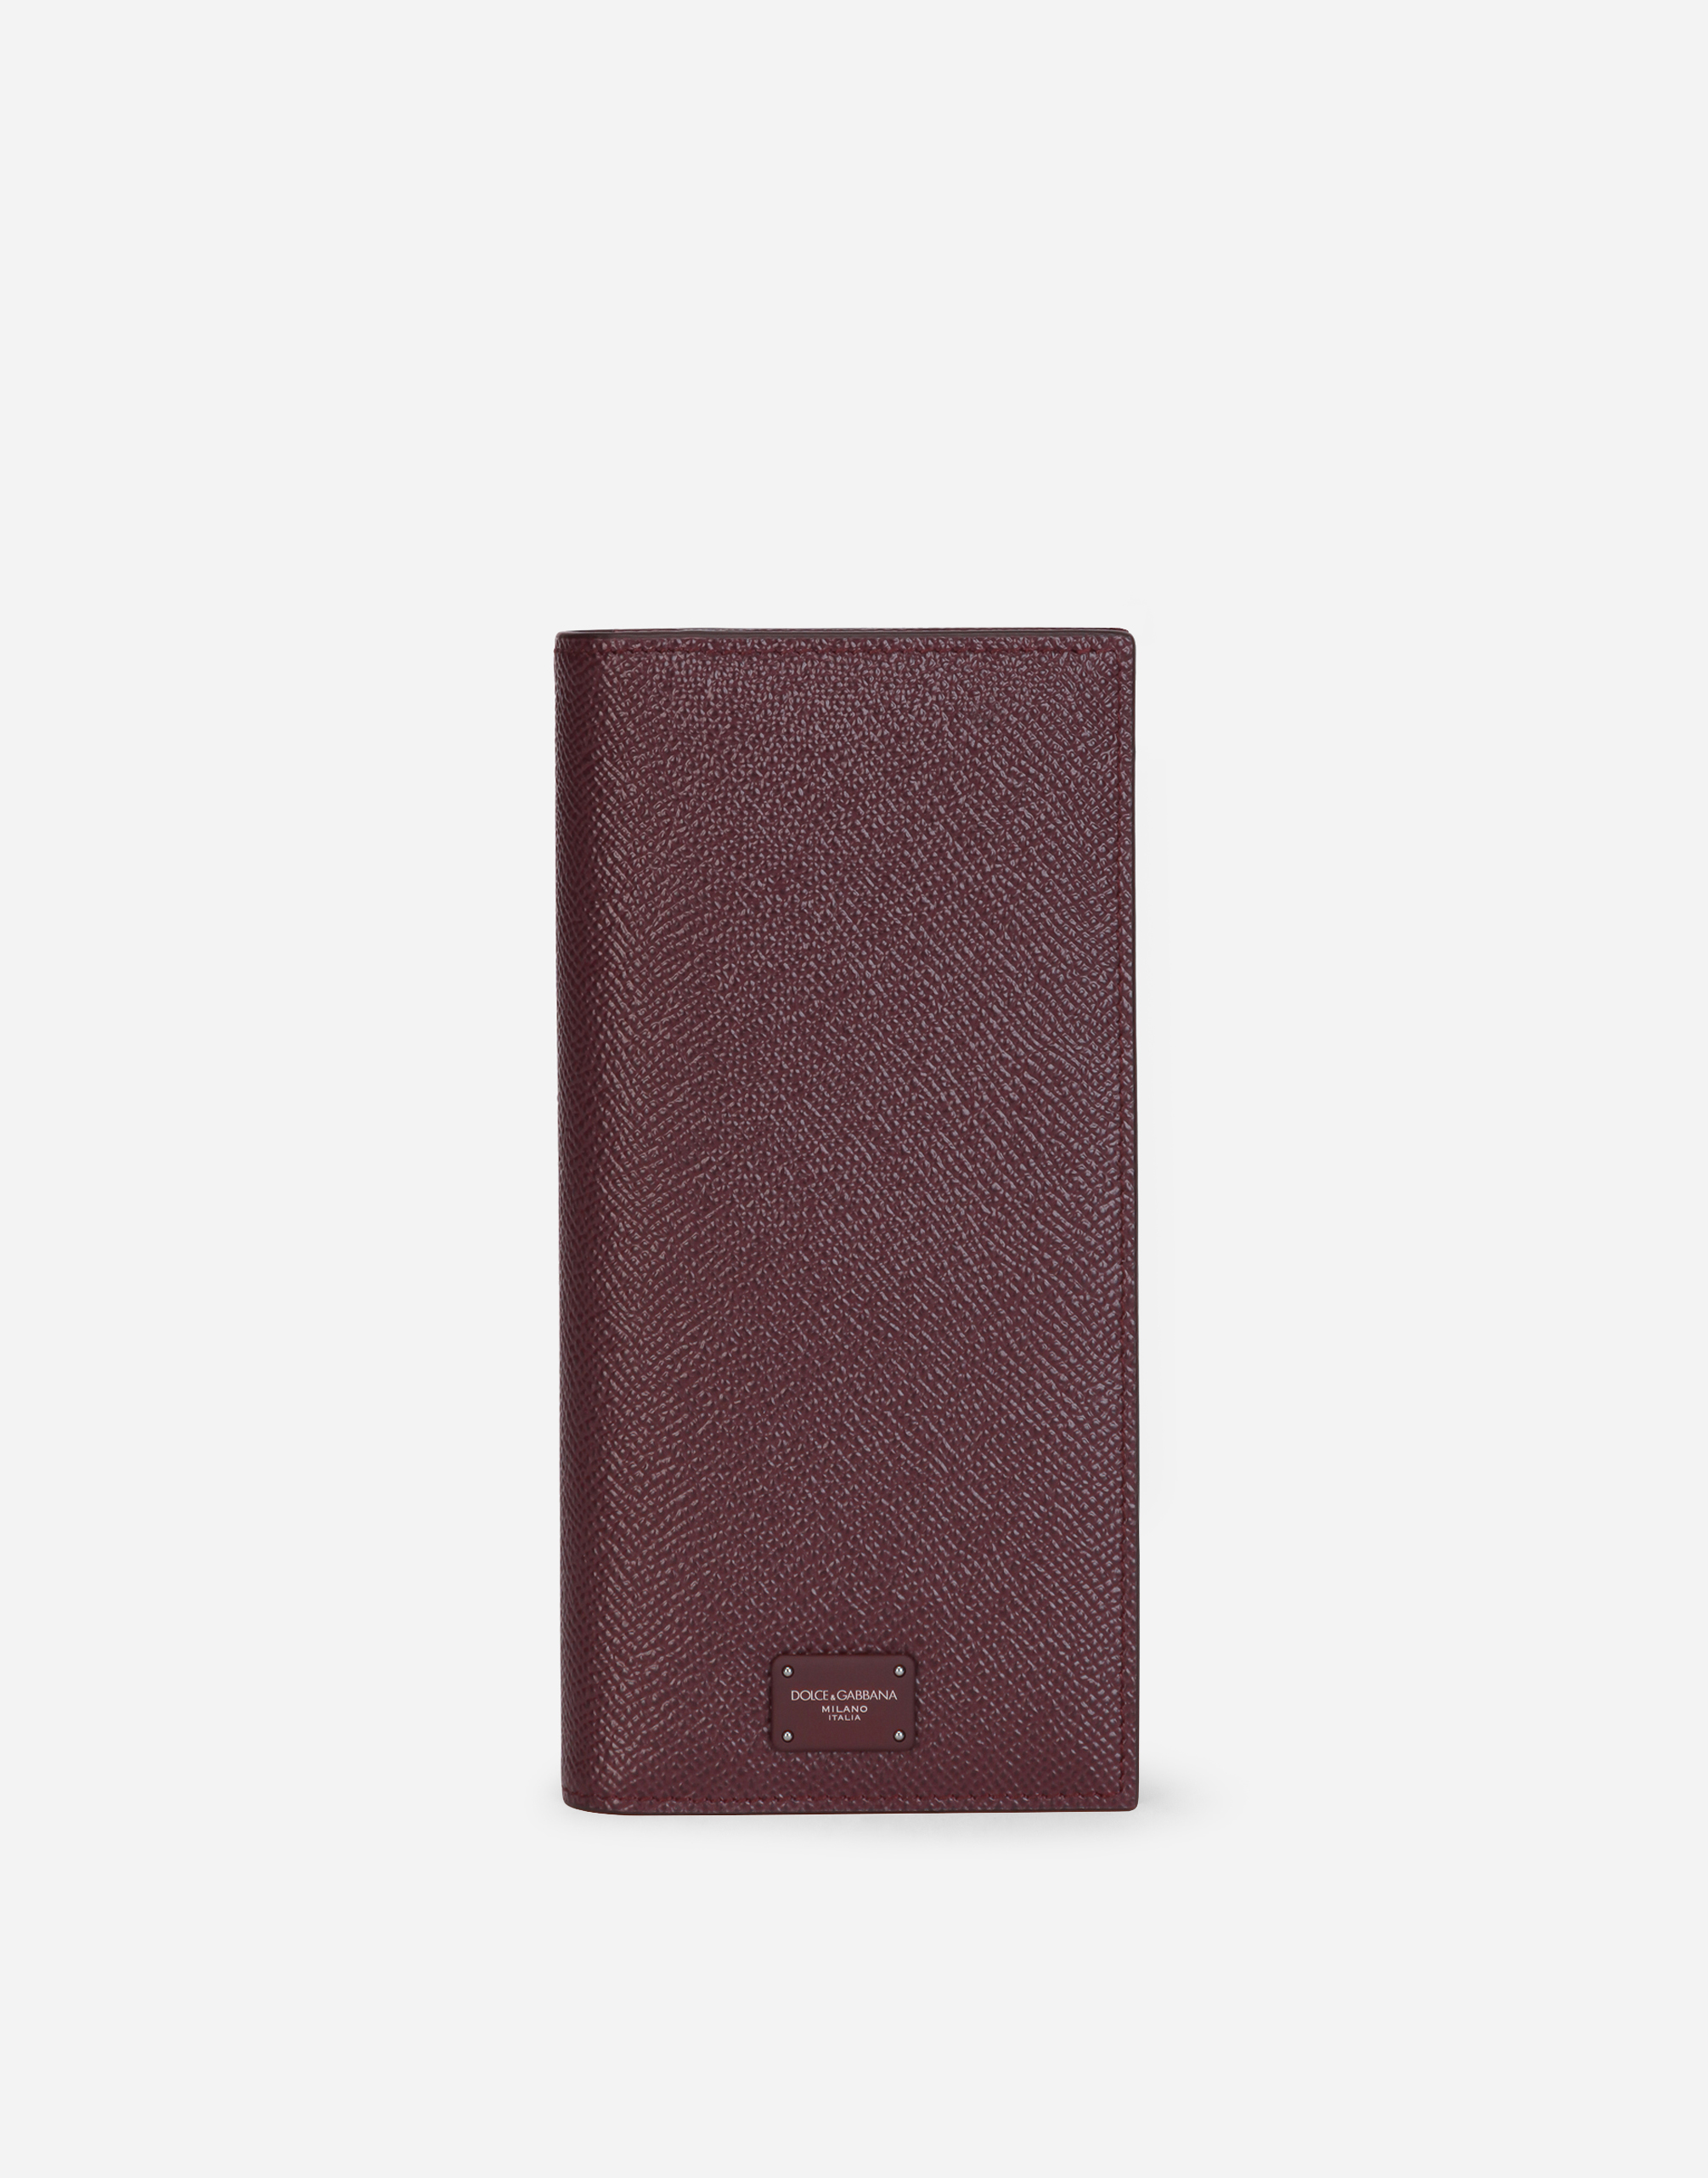 Dauphine calfskin verticle wallet with branded tag in Bordeaux